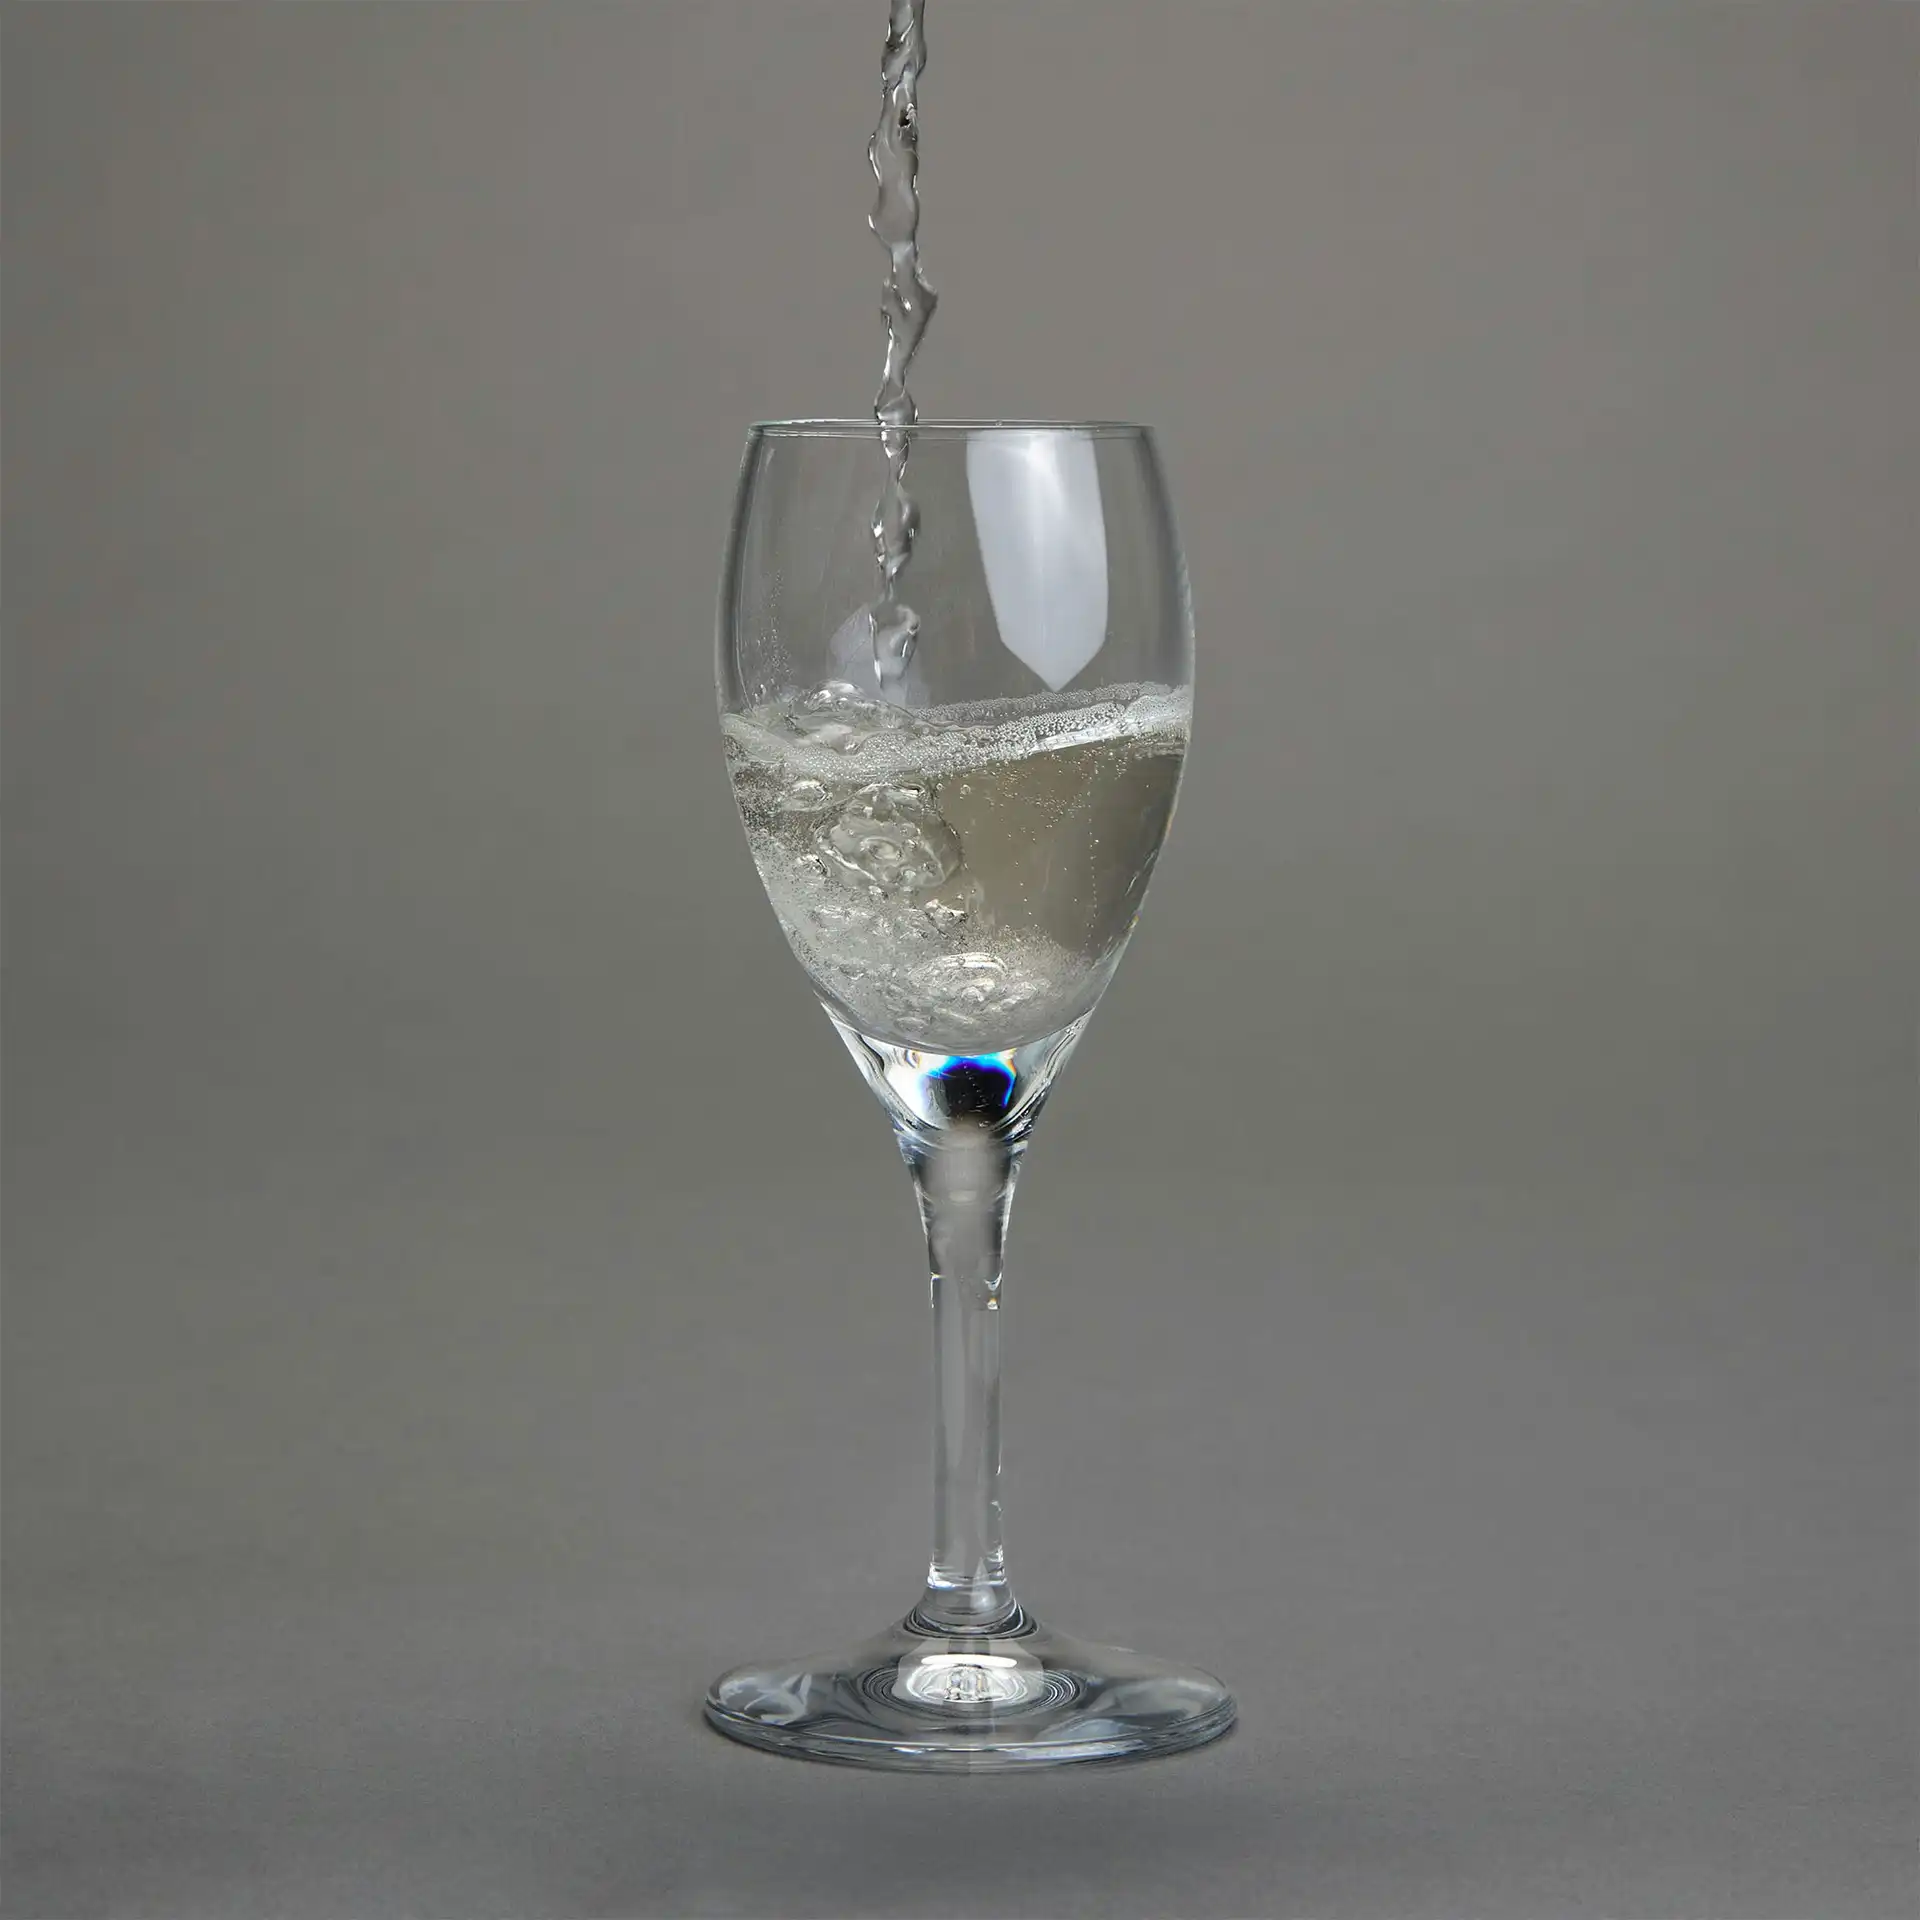 A glass being poured